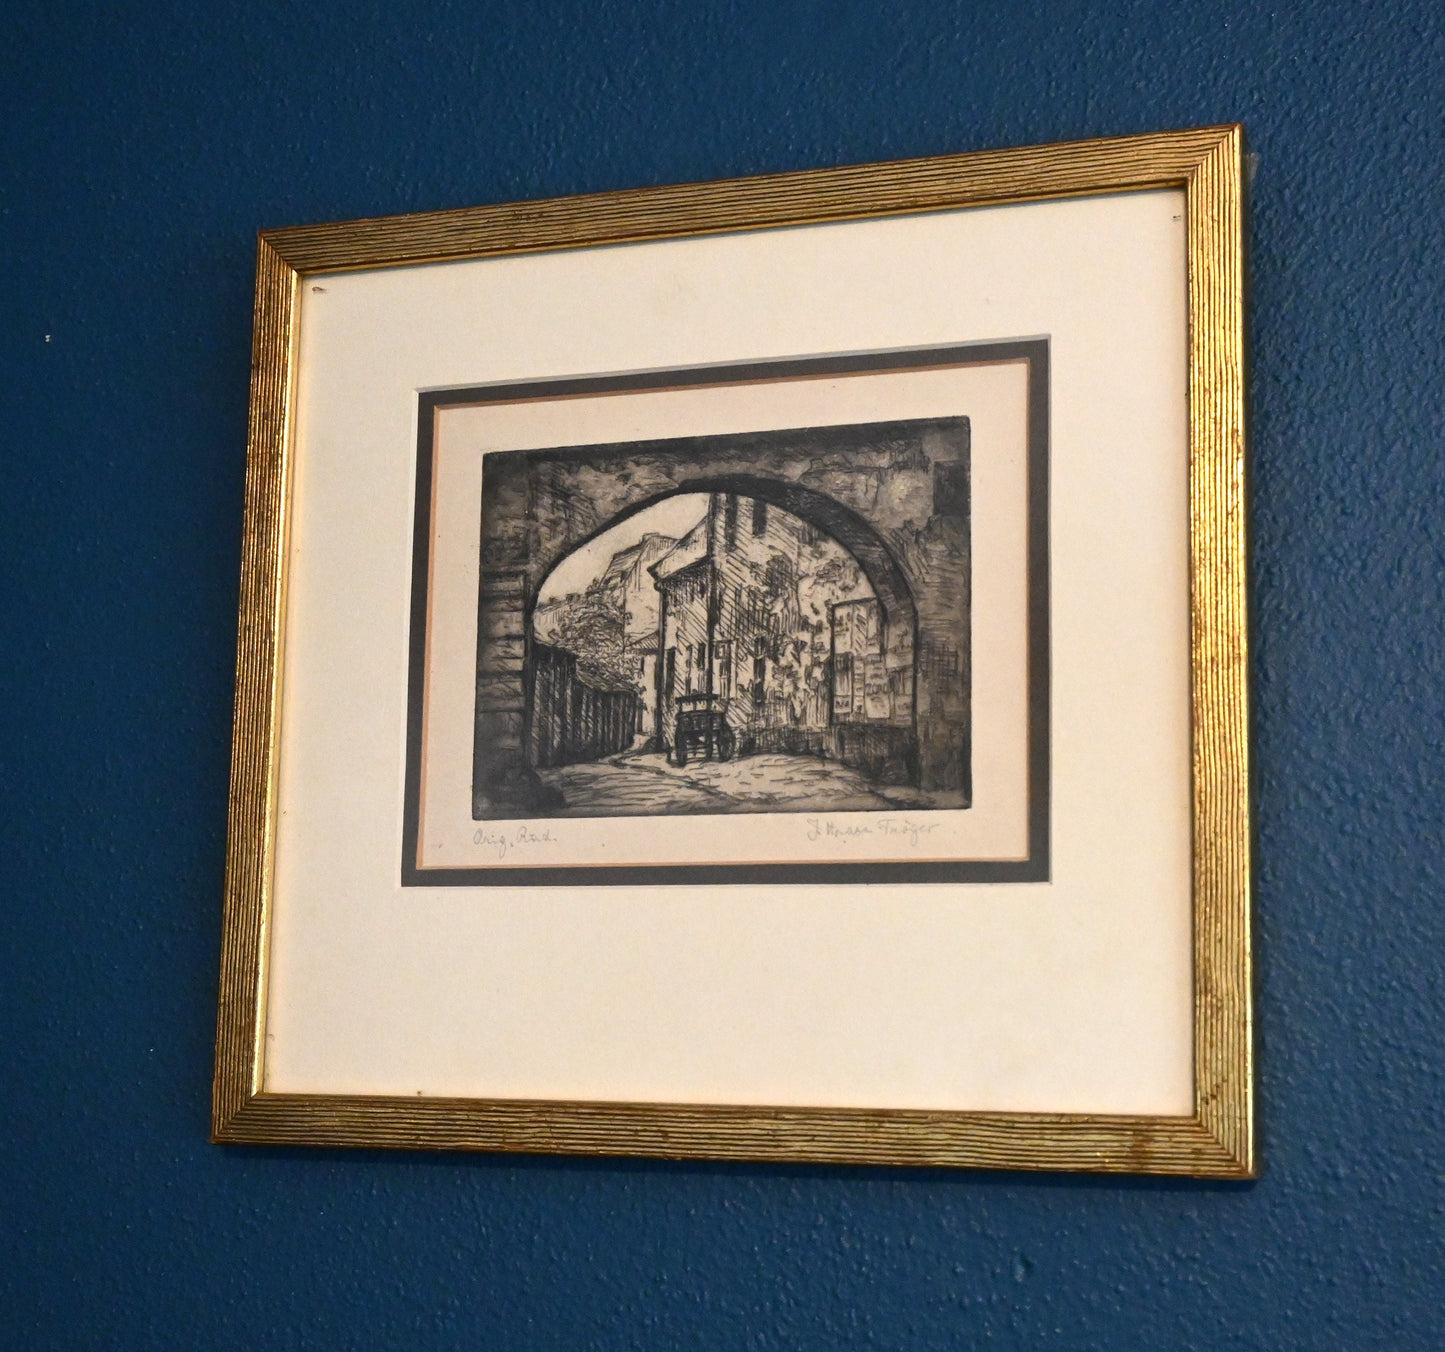 Janina Haase-Troger (b. 1886) Austrian etching, framed, signed lower right in pencil plate size: H 4 1/8" W 5 3/4"